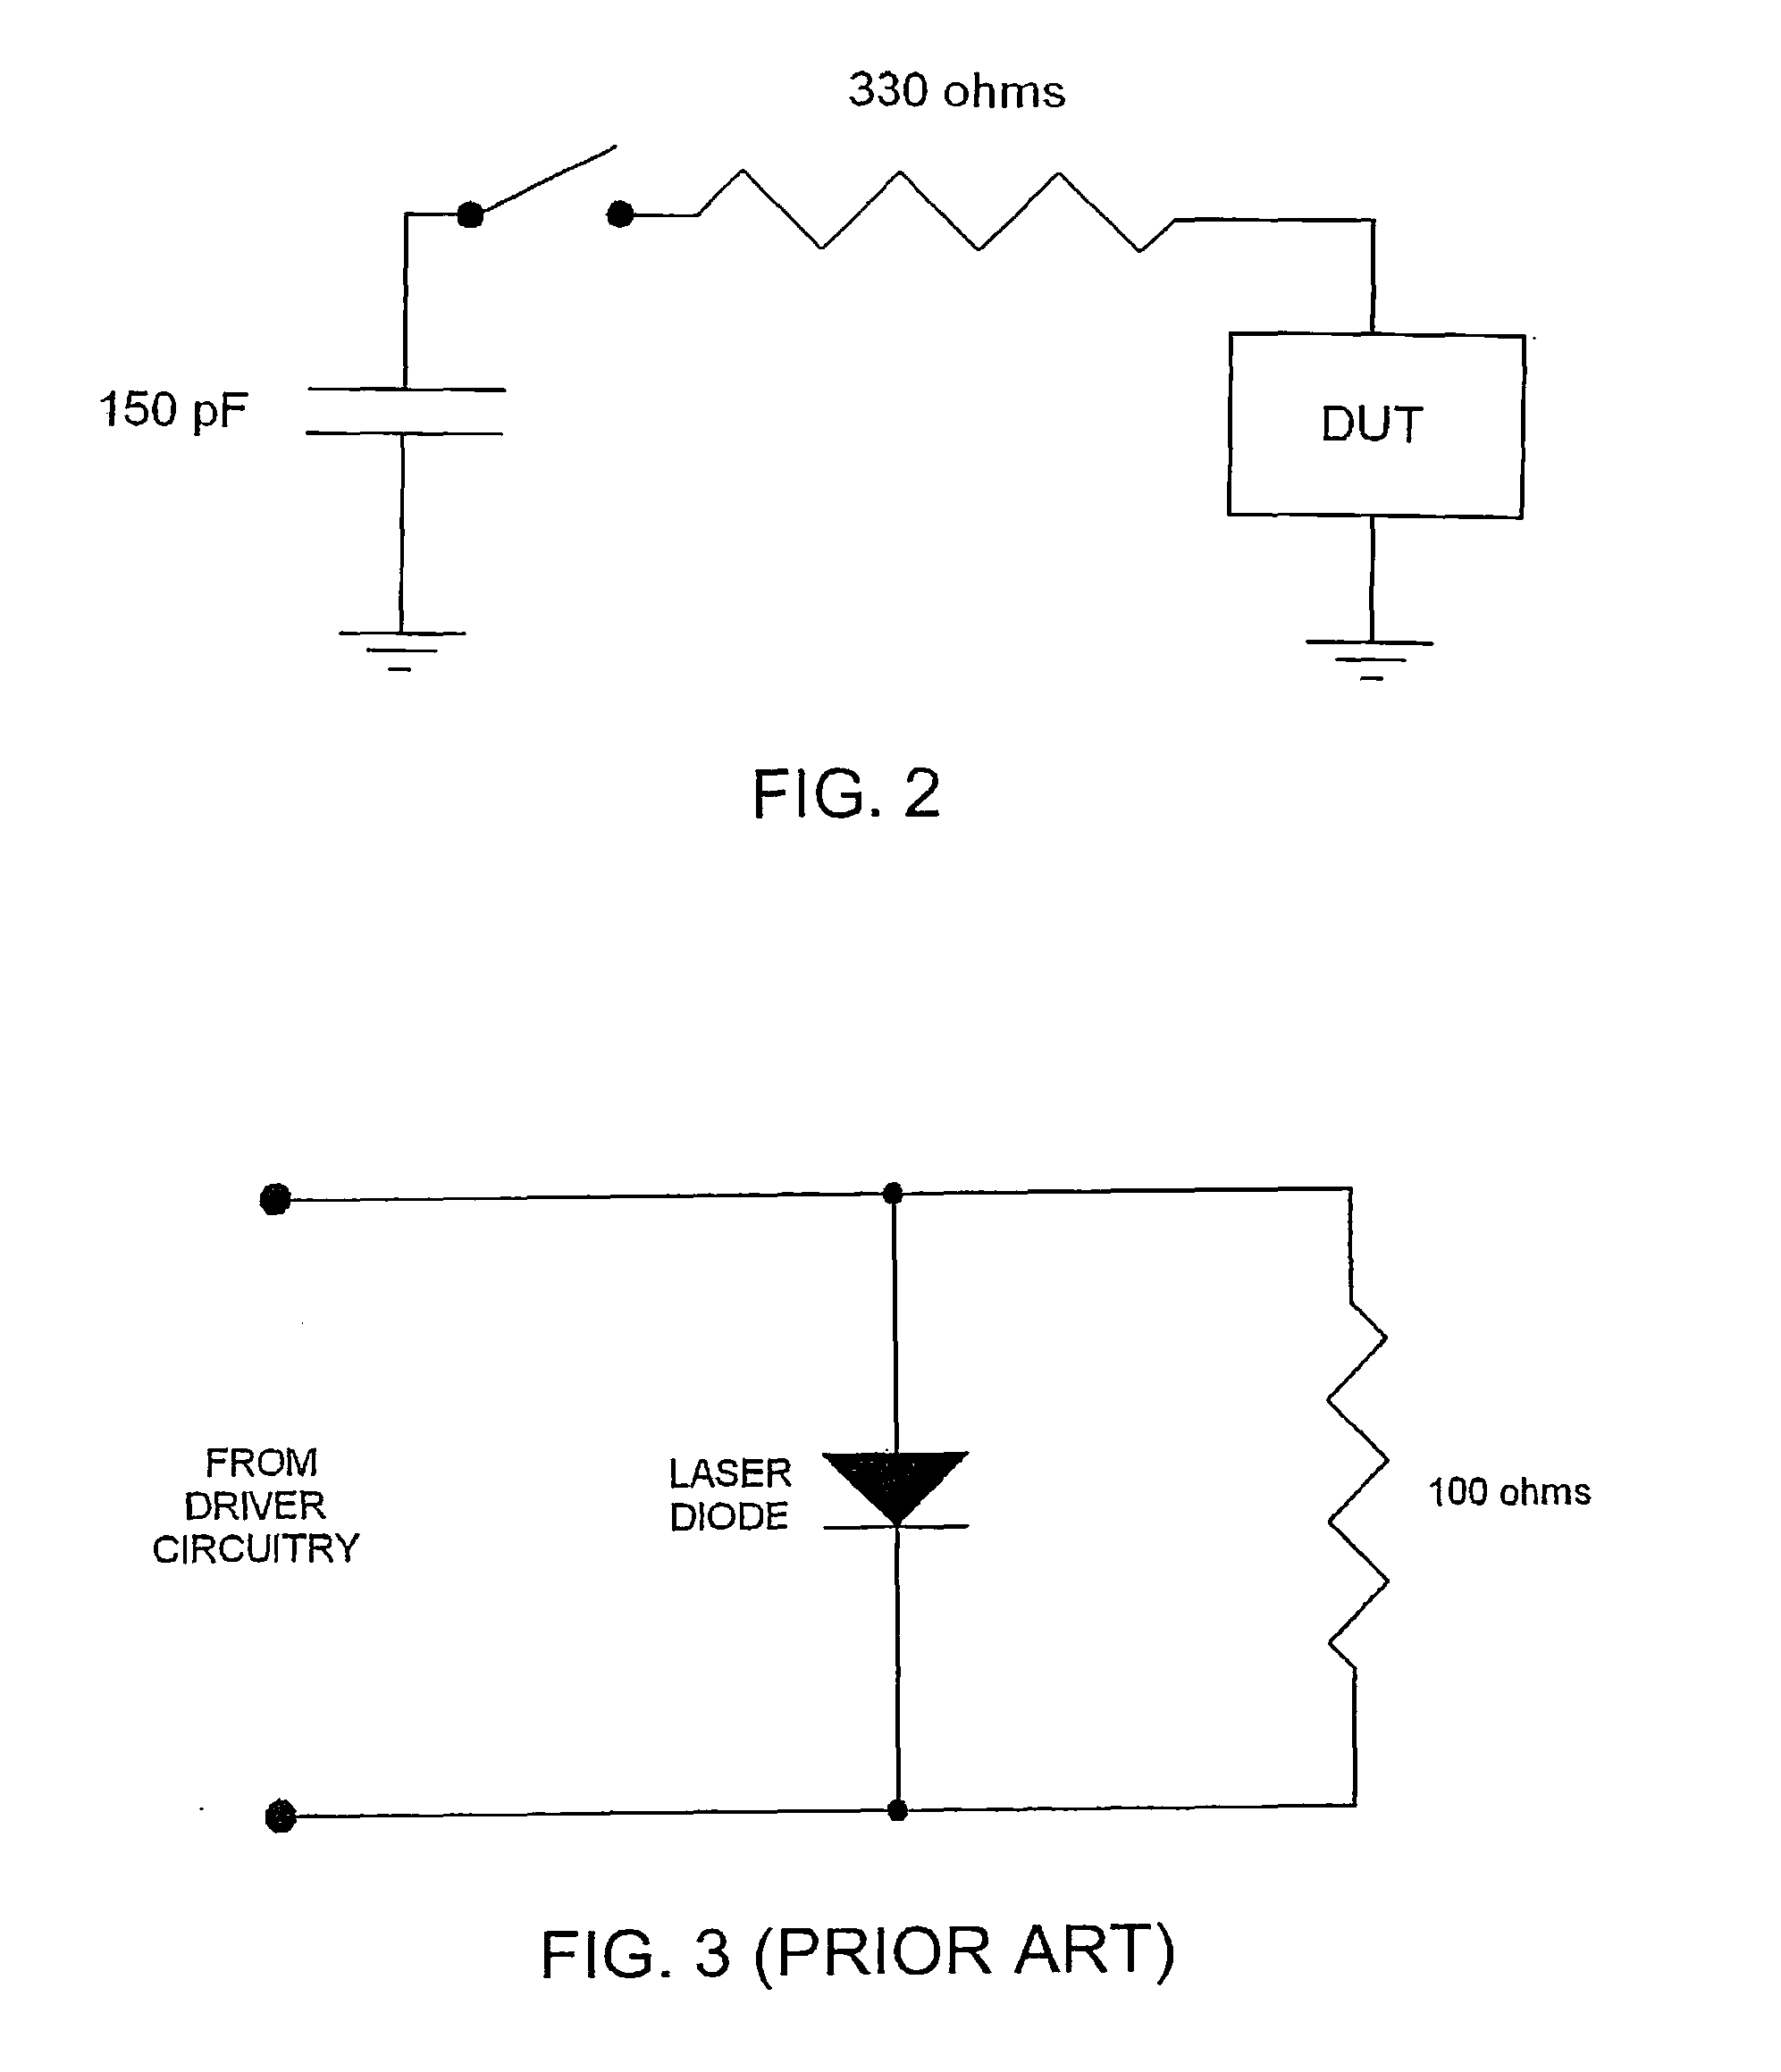 Fault protector for opto-electronic devices and associated methods